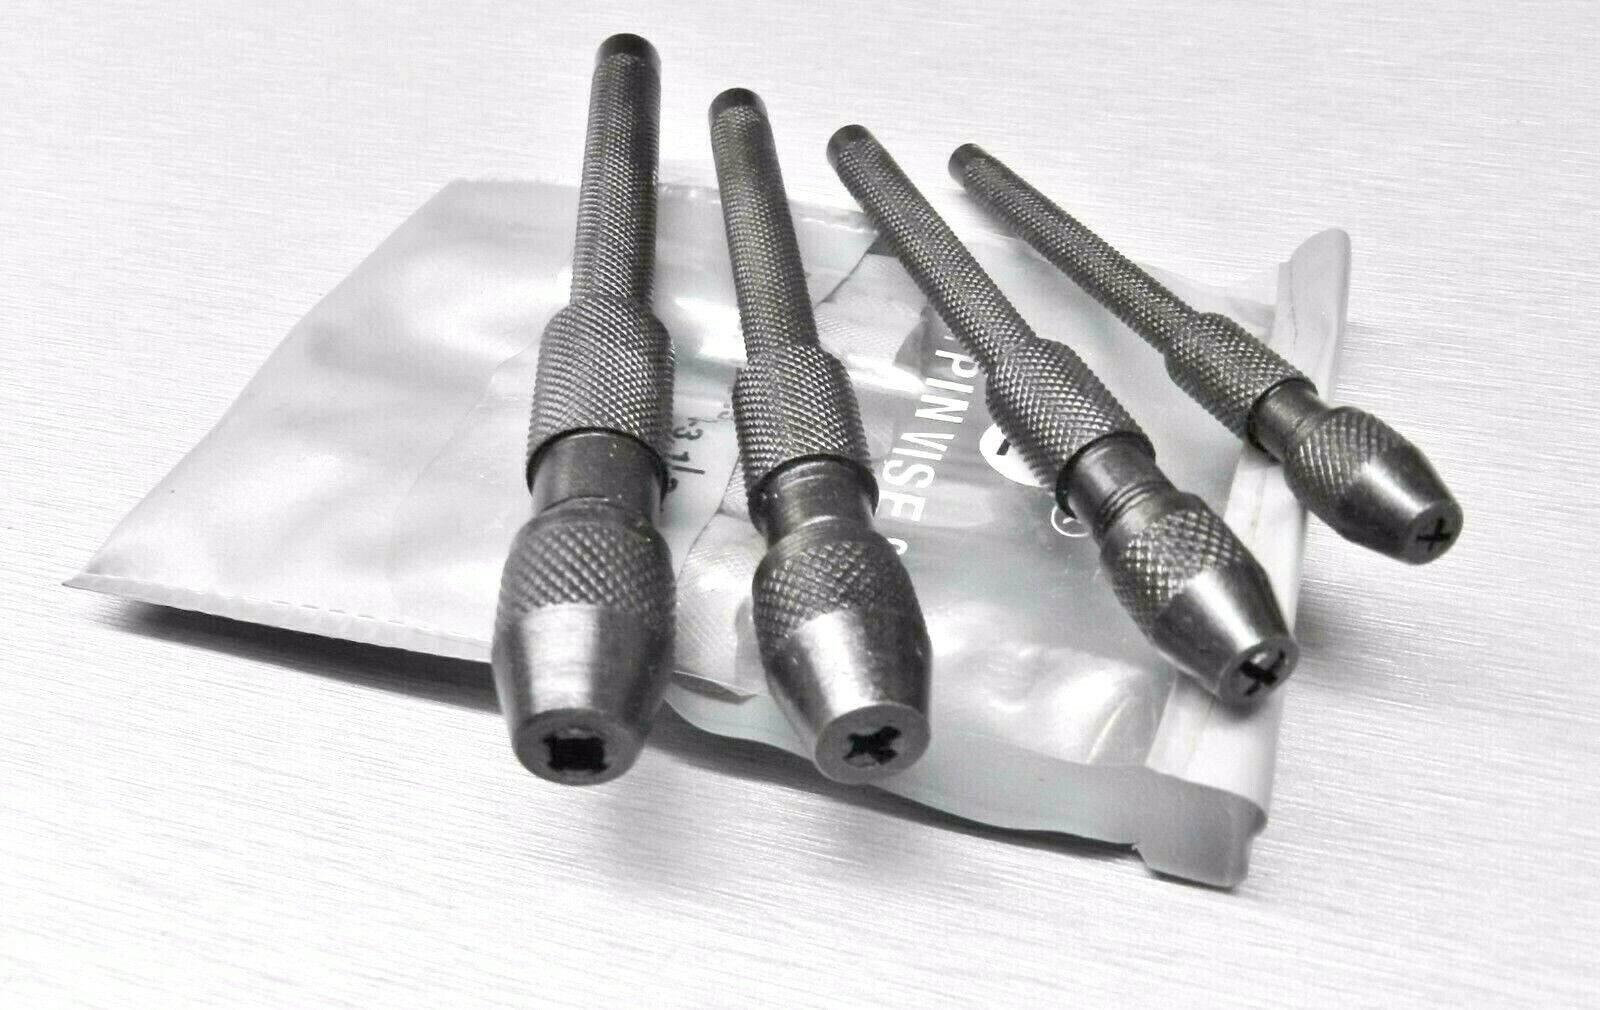 4 Pc Pin Vise Set Hand Held Hollow Handle Black Finish 4 Piece Vice Chuck Sizes